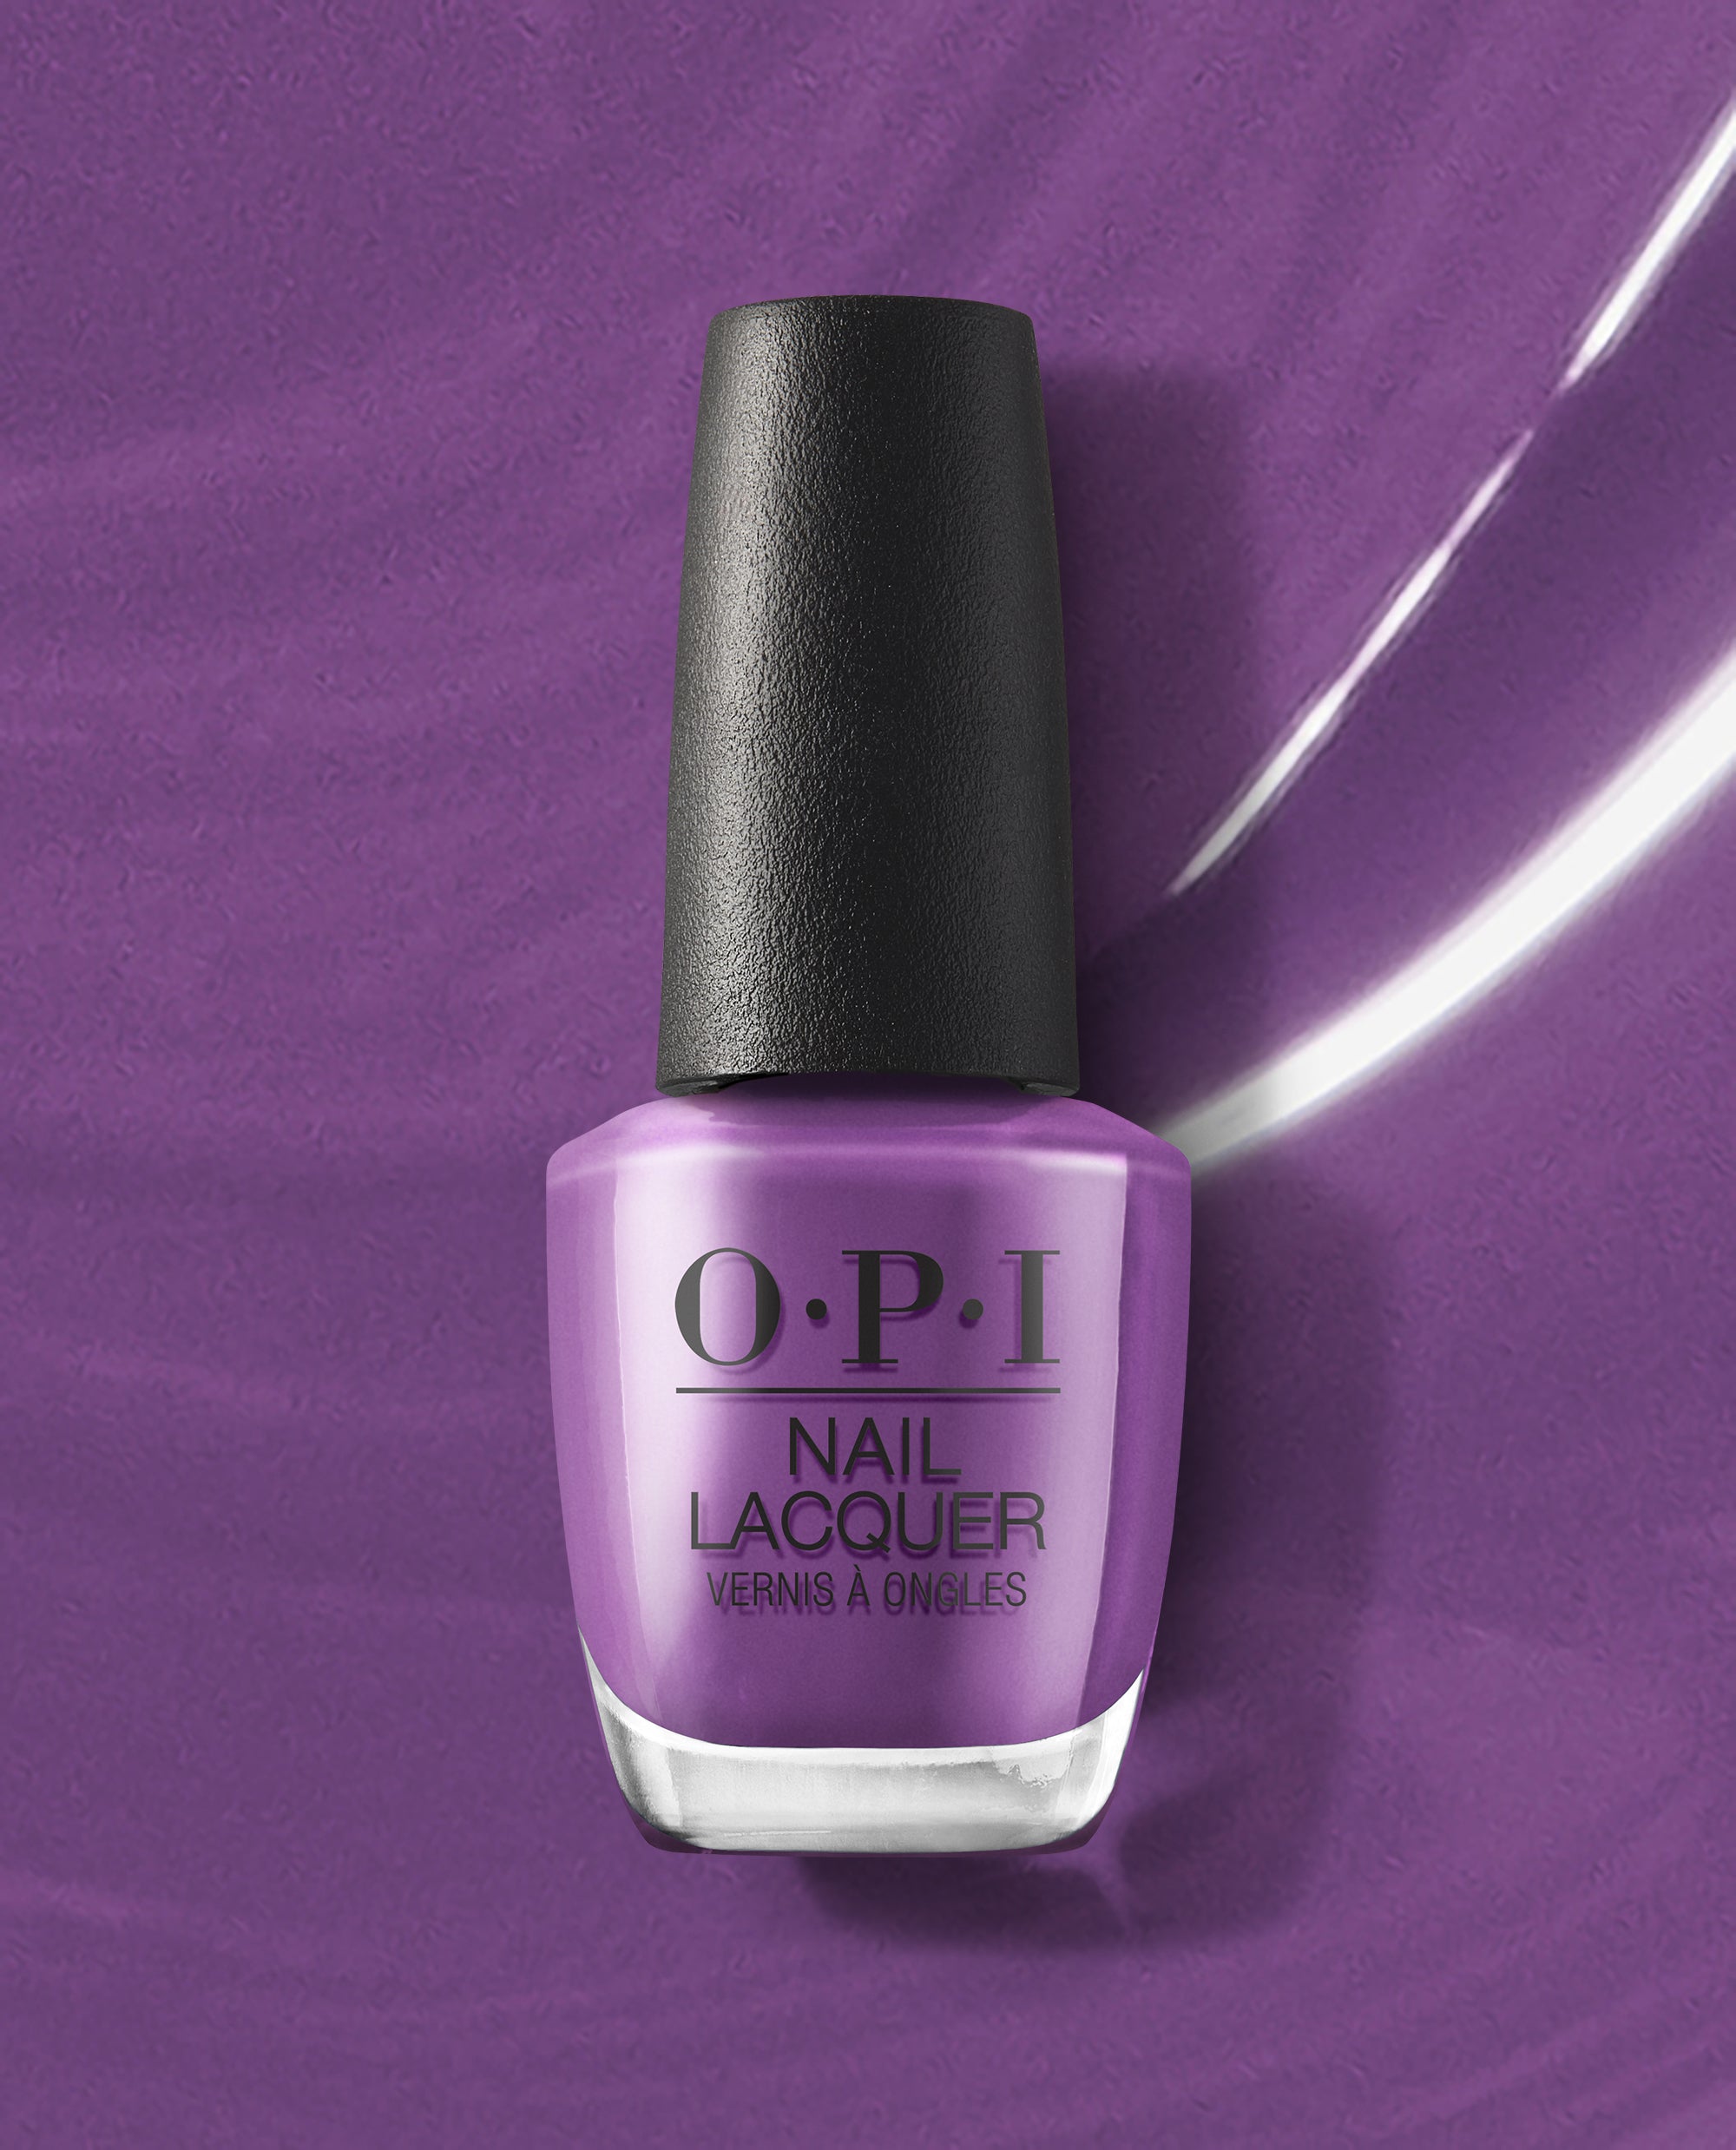 Create bright & pastel nail looks with OPI's 12 summer shades – Scratch